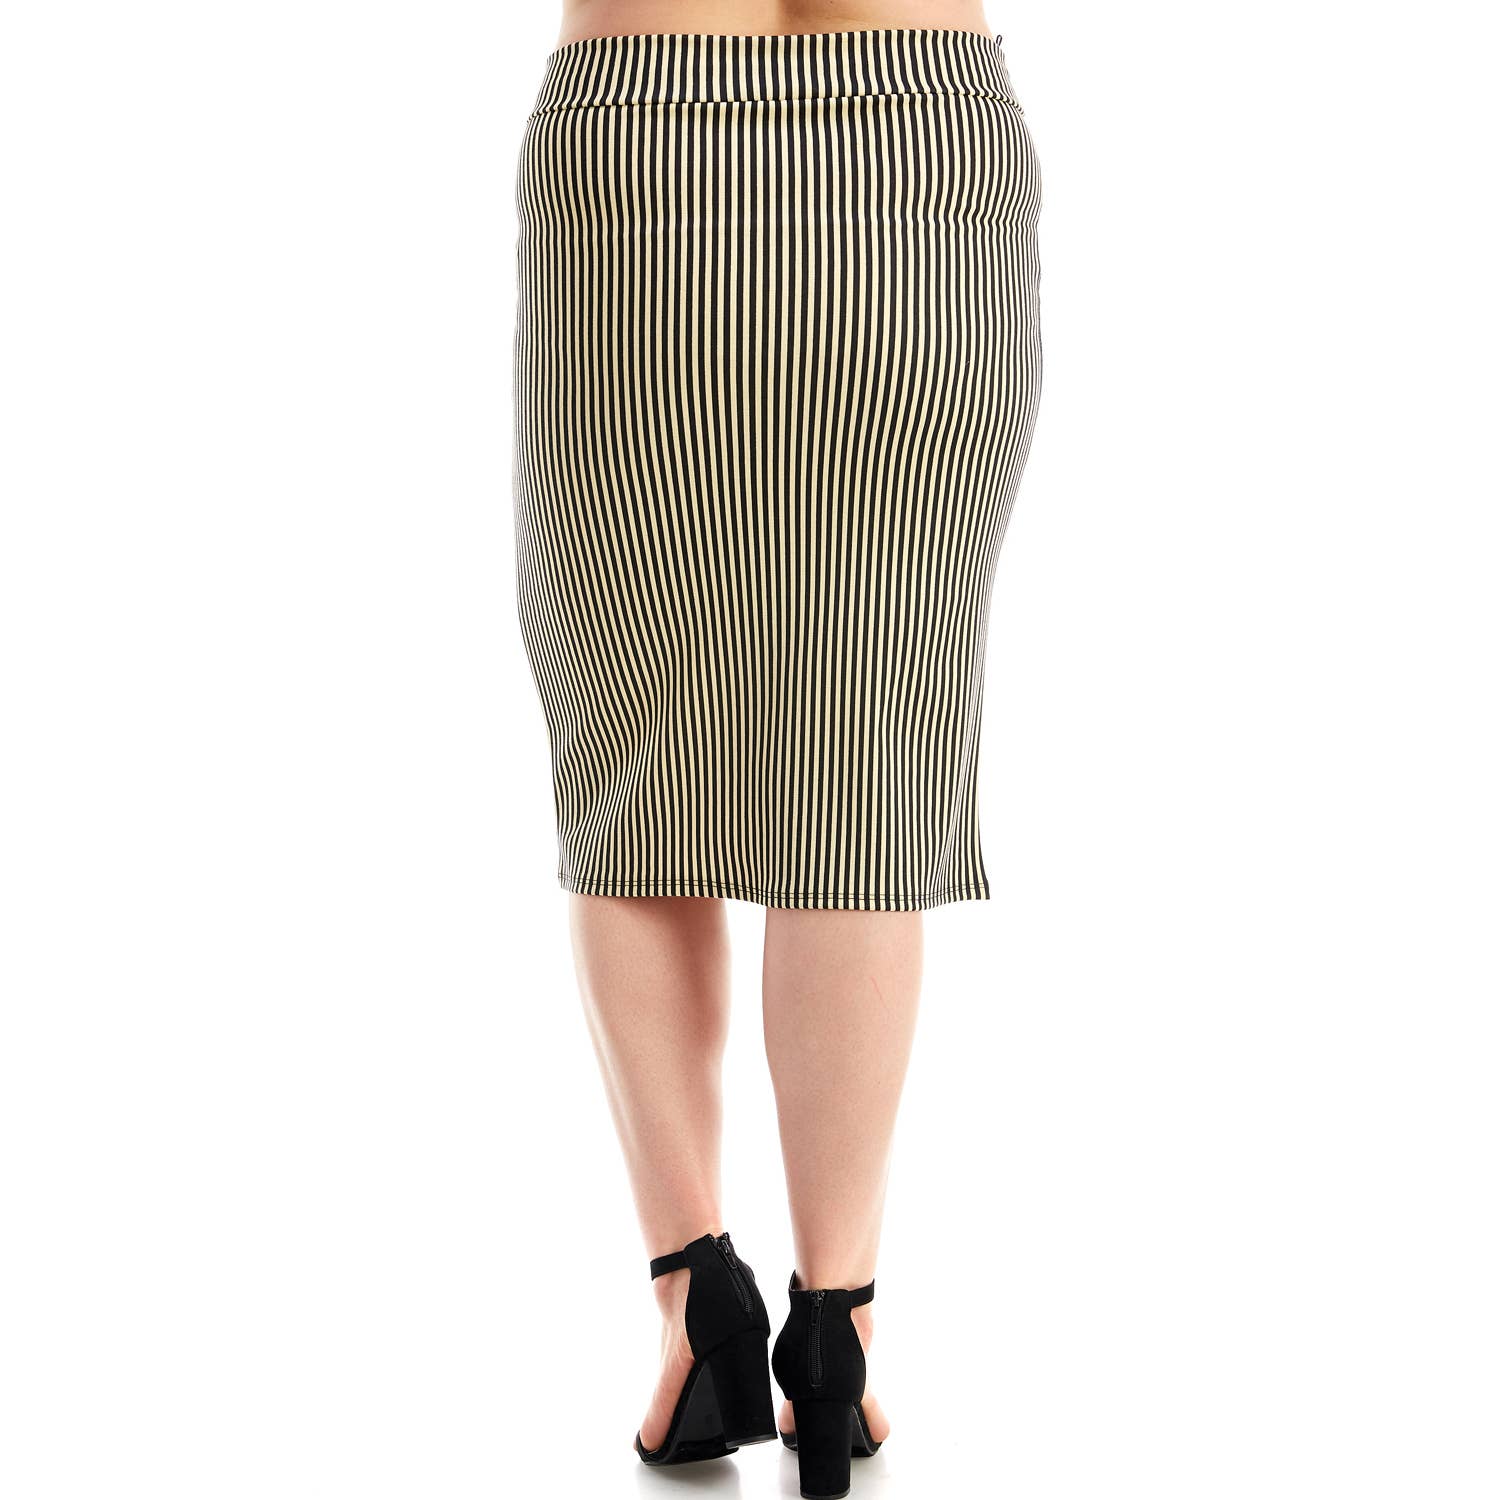 AKS-9014PTX Plus Size High Waisted Print Pencil Skirt Print | Made in USA | Azules Wholesale